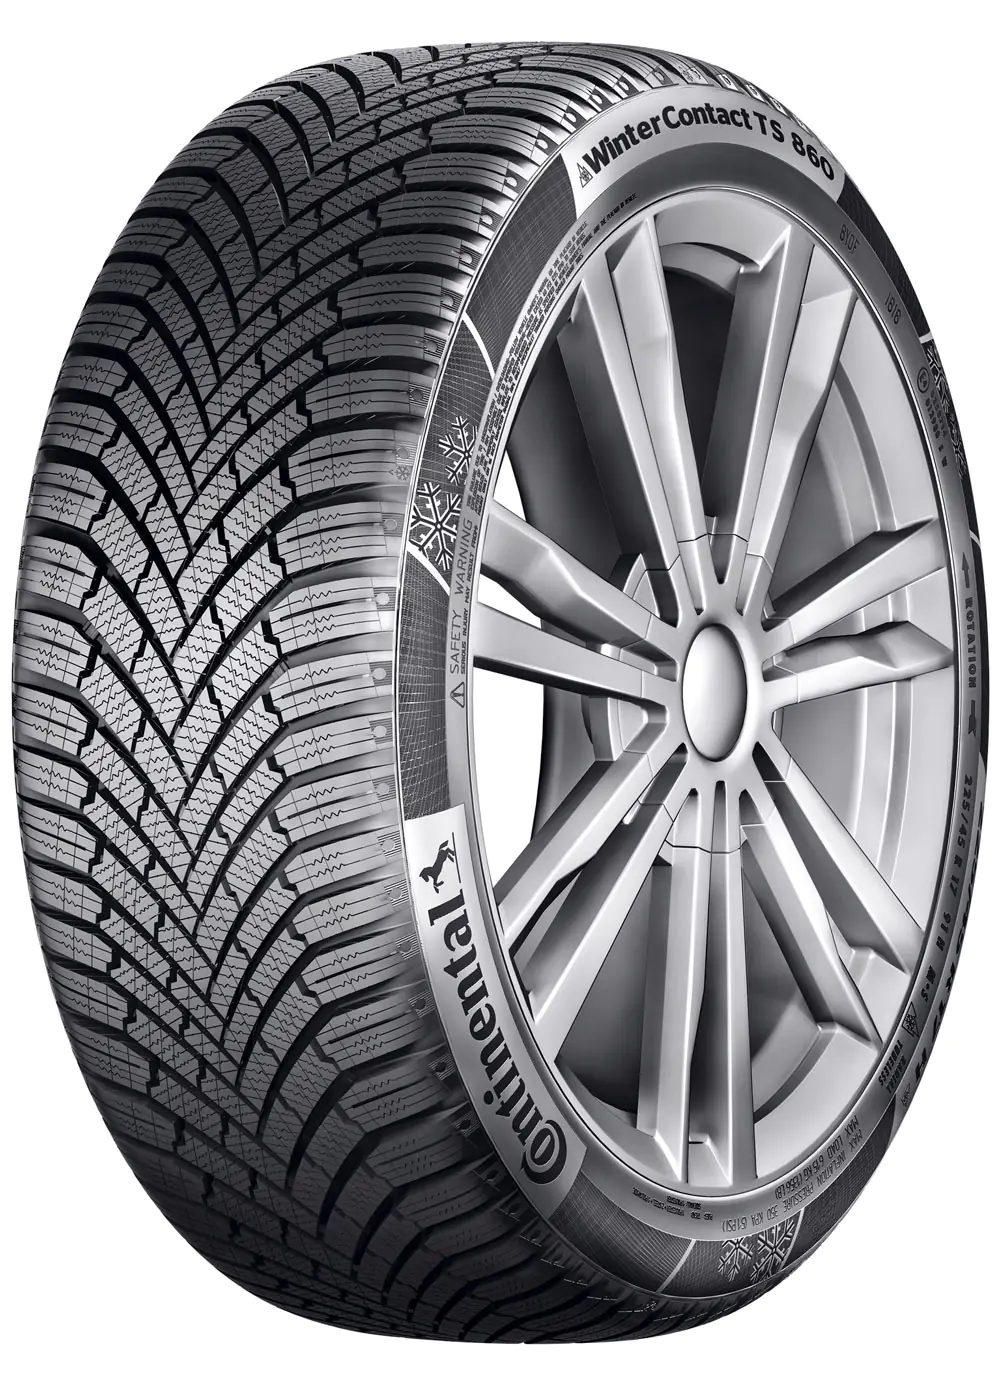 Gomme 4x4 Suv Continental 305/35 R21 109V WinterContact TS860 S N0 XL M+S Invernale